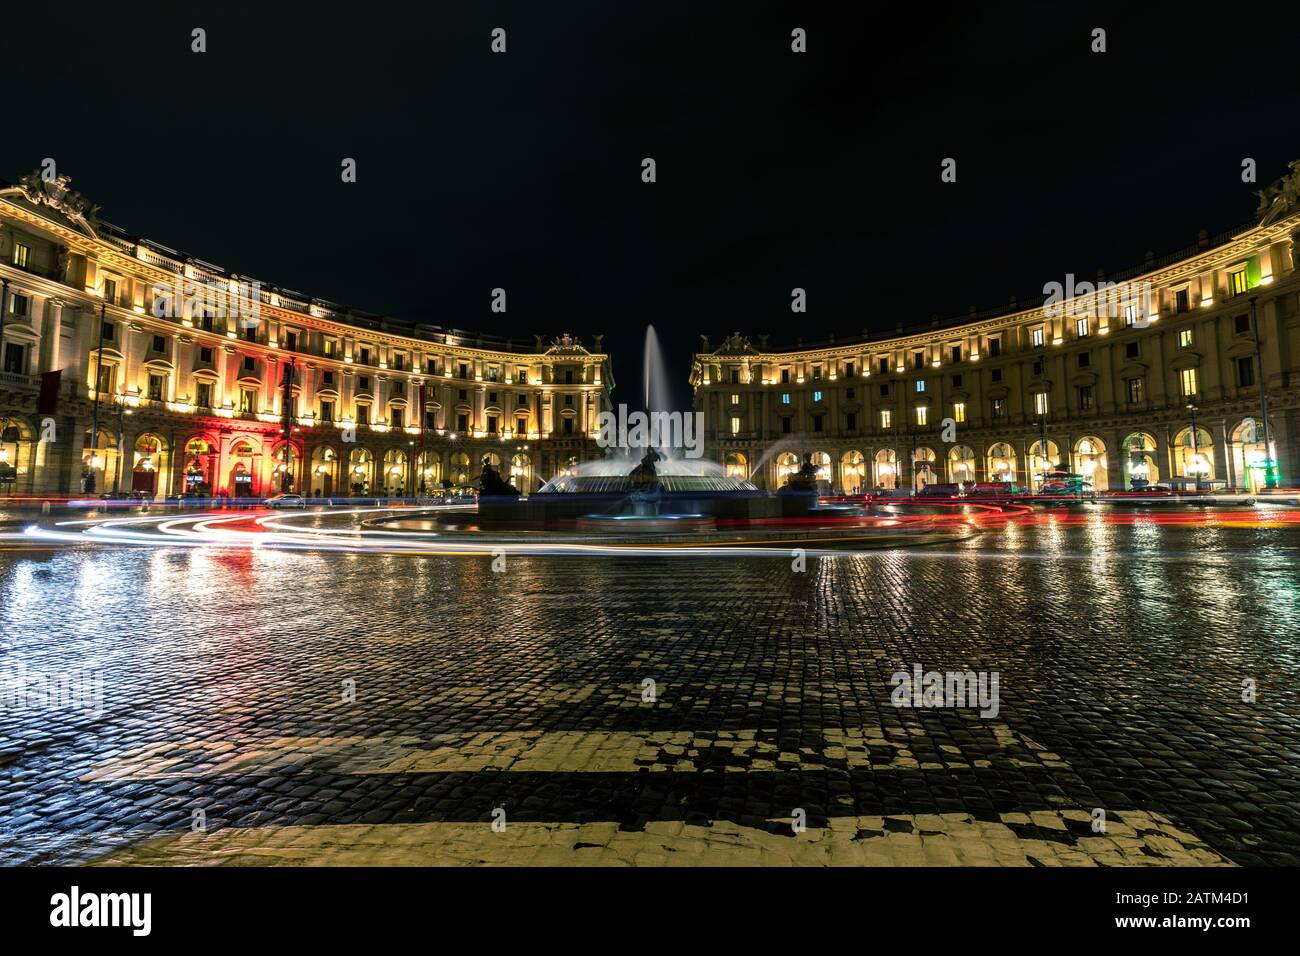 October 18,2019 Piazza della Repubblica, Rome Italy.lights reflection on the road after rain at night, Piazza della Repubblica is a semi-circular piaz Stock Photo